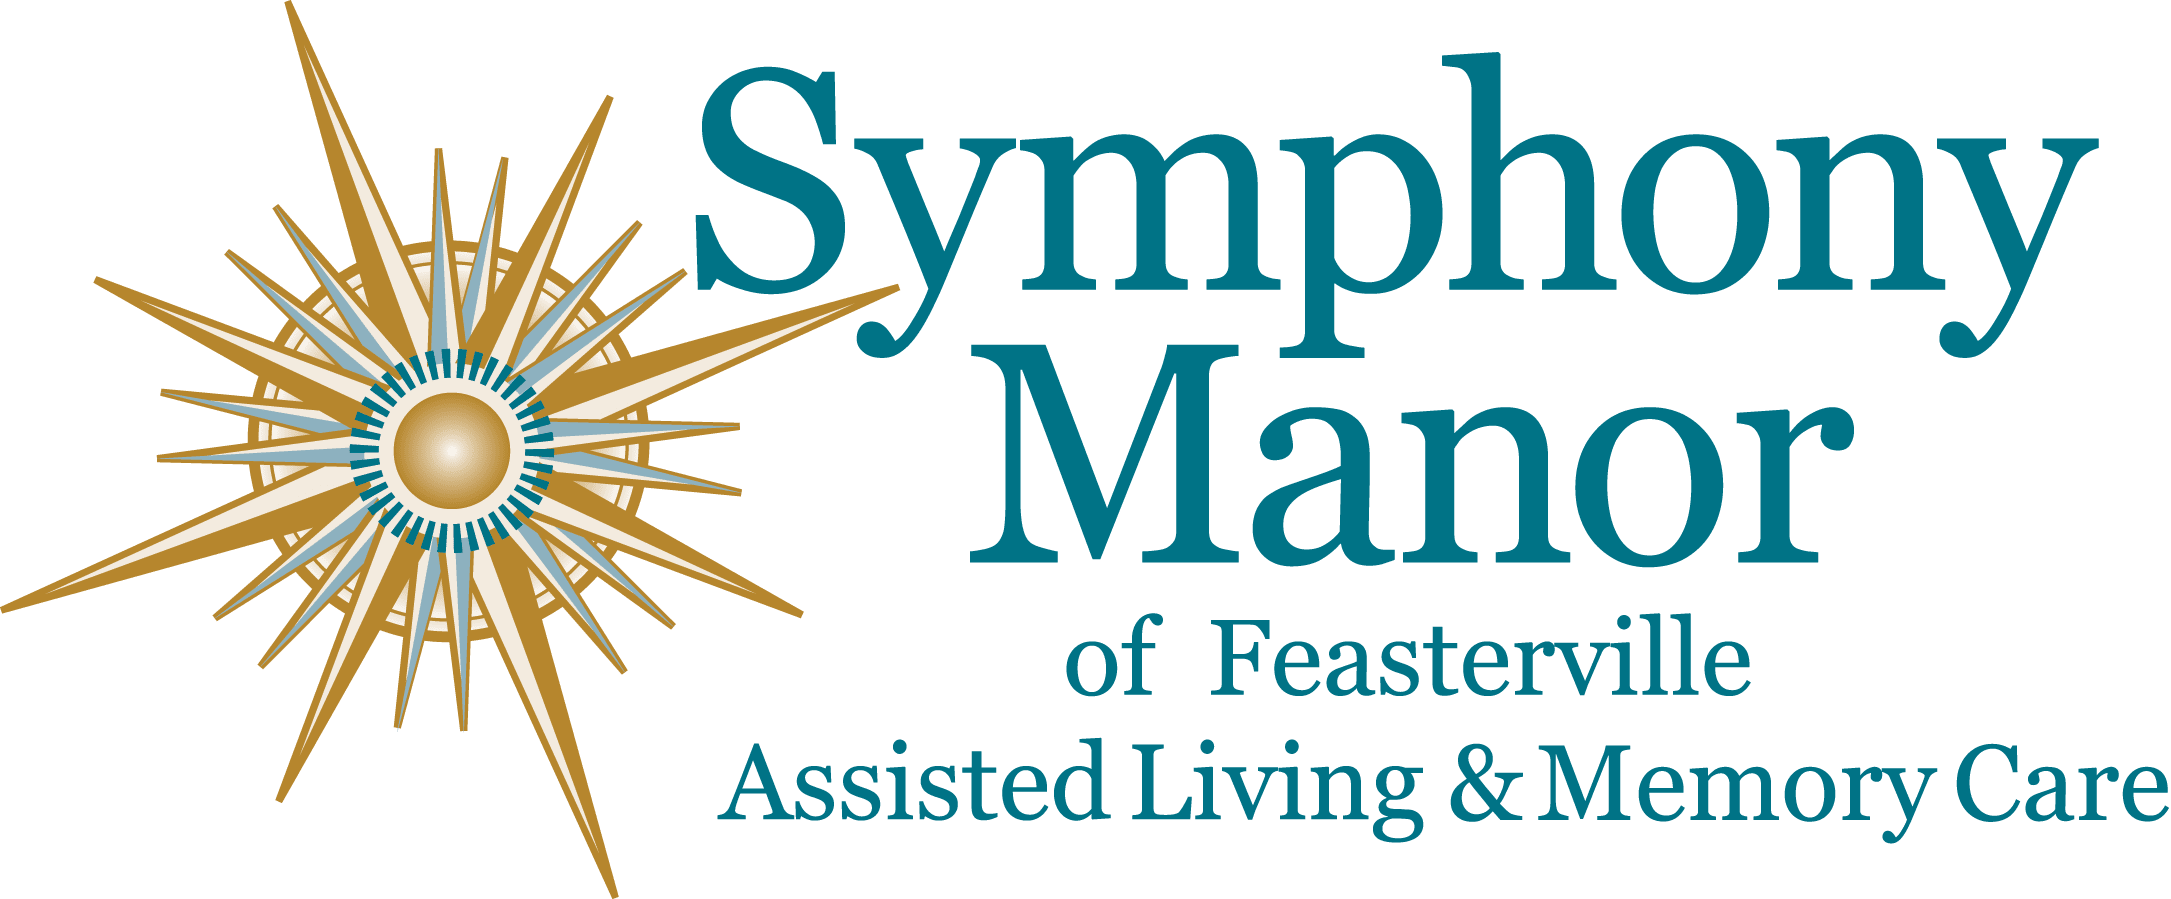 Symphony Manor of Feasterville